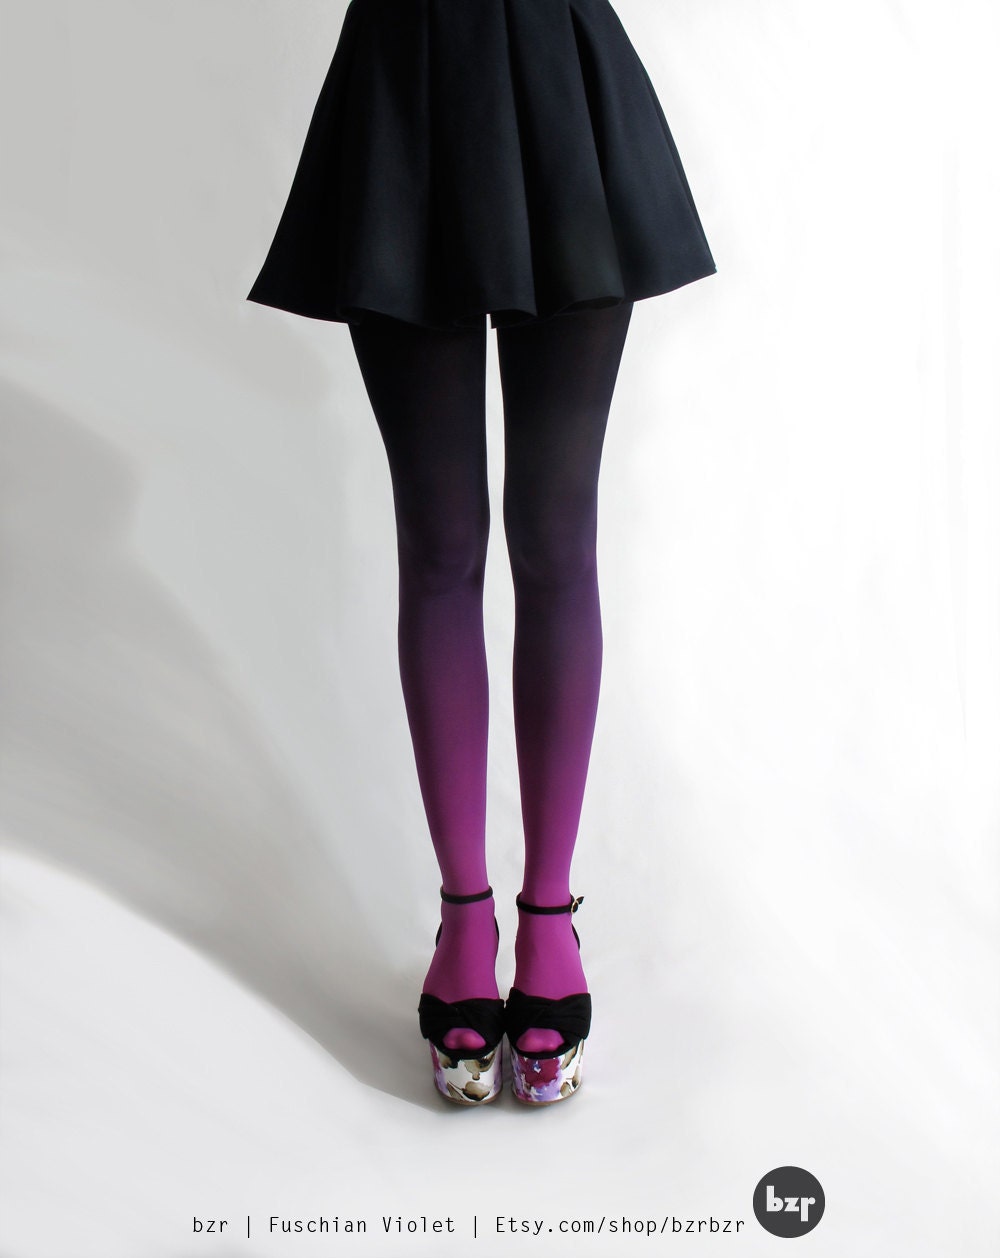 bzr Hand-dyed Ombré Tights in Fuschian Violet